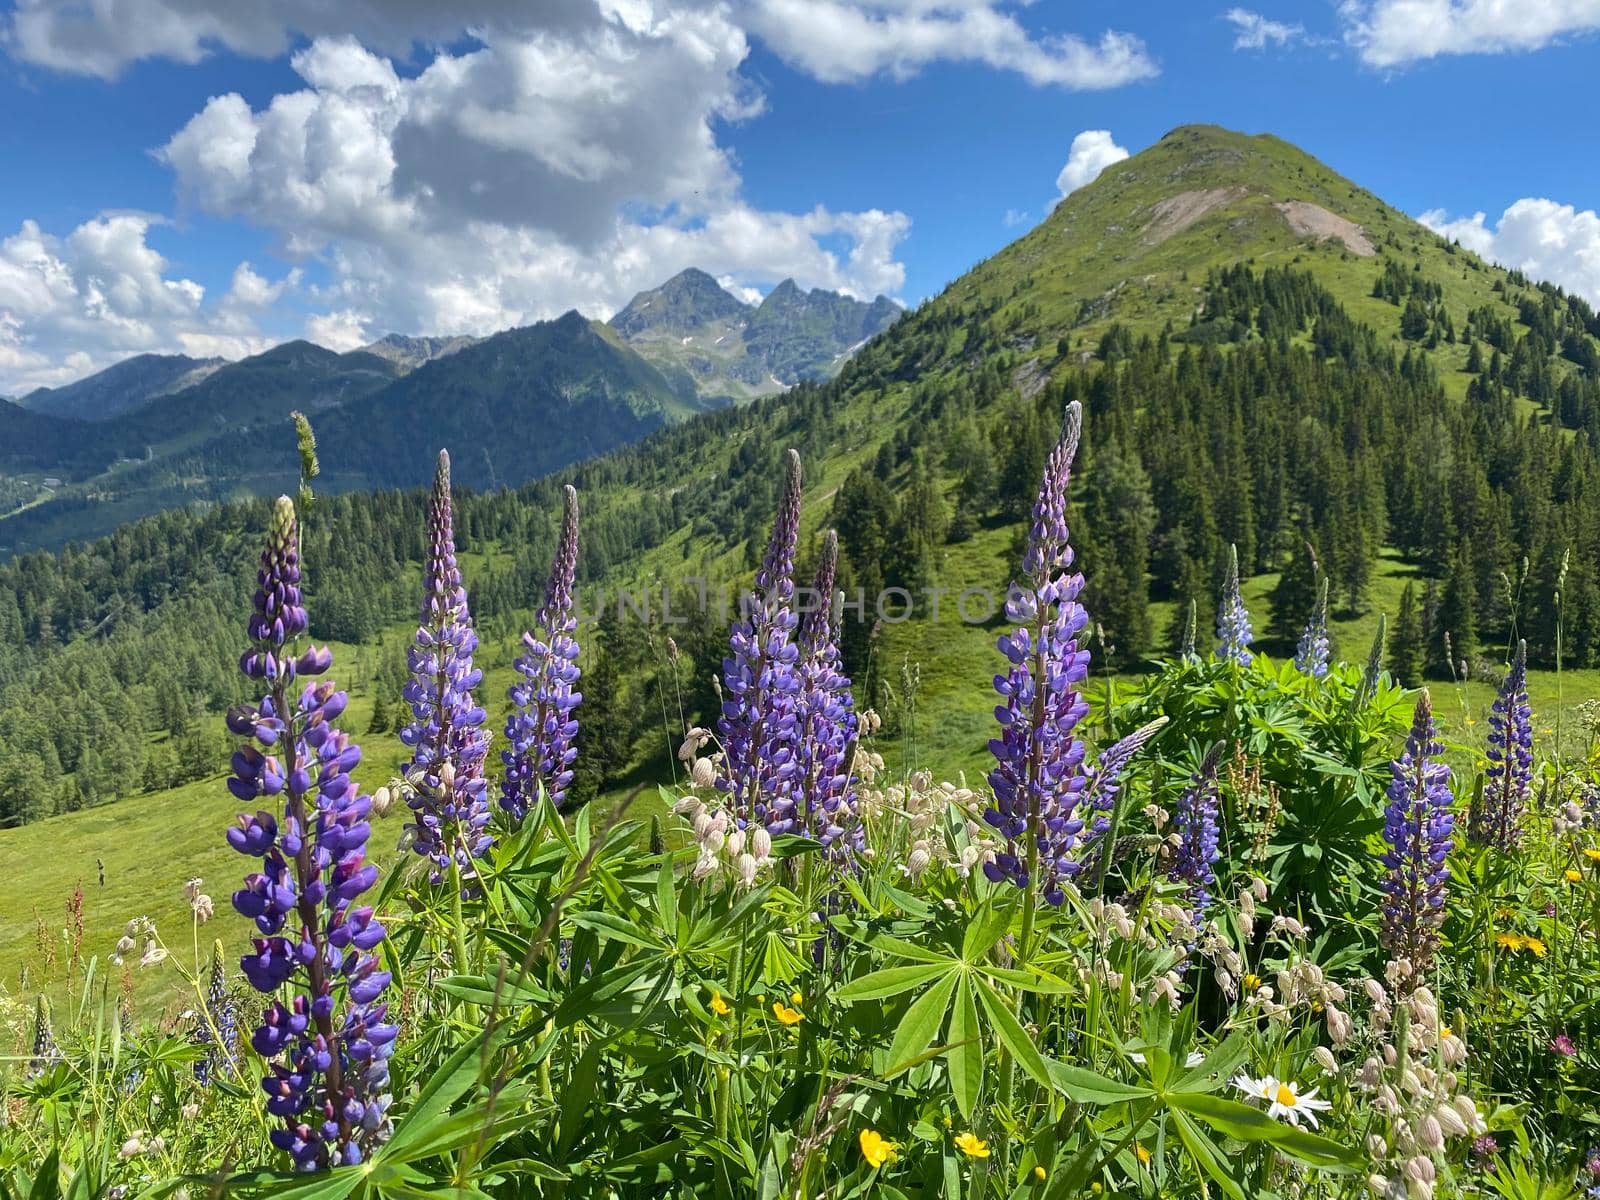 Summer scenery near the Krahbergzinken mountain, Austria. Krahbergzinken is a mountain situated west of Untertal valley and south-east of Schladming.